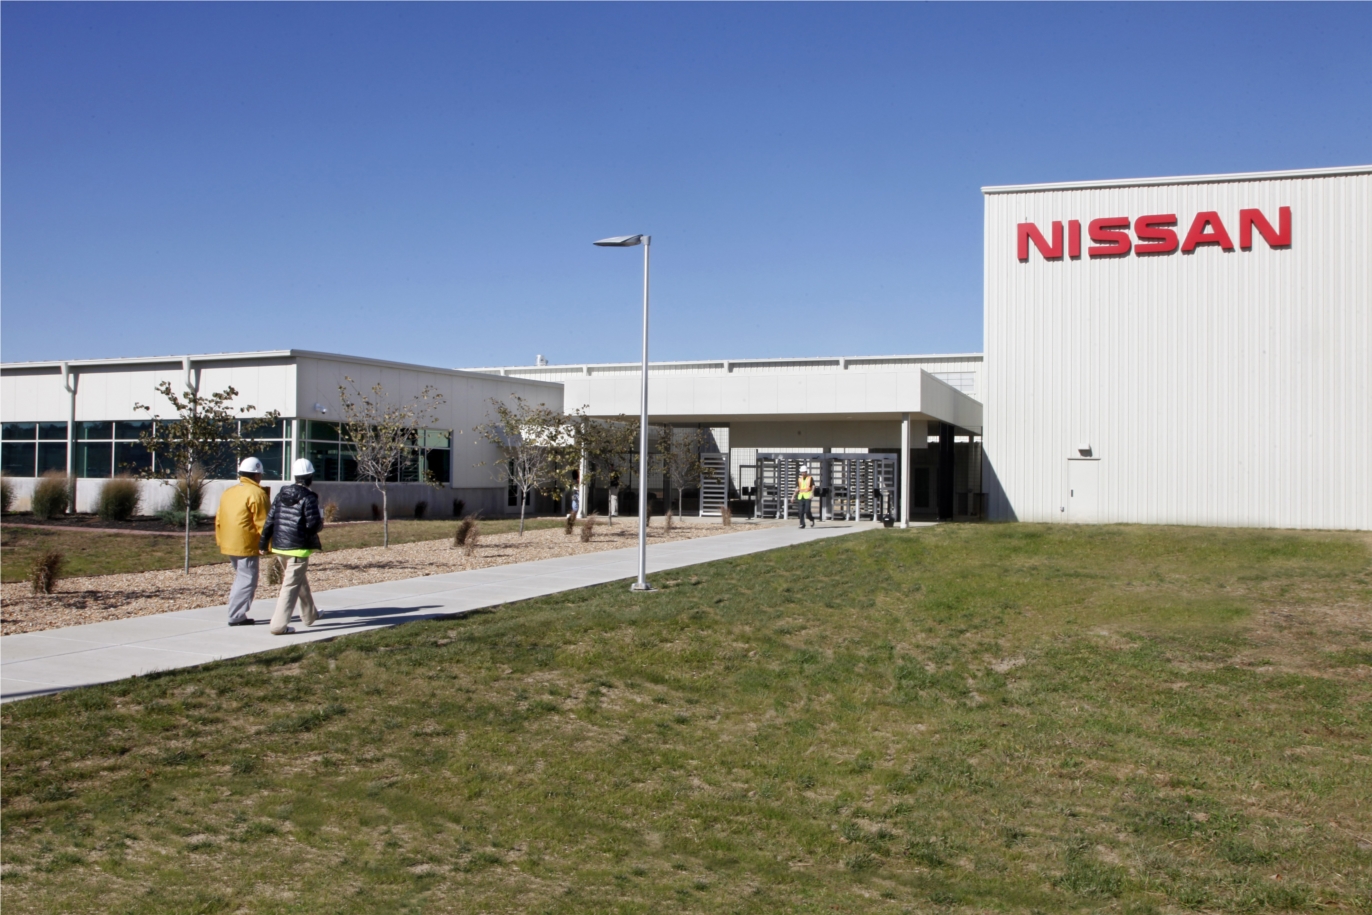 Nissan is the only automaker that manufactures its own electric vehicle batteries at the largest lithium-ion automotive battery plant in the U.S., located on the grounds of the Smyrna assembly plant.

